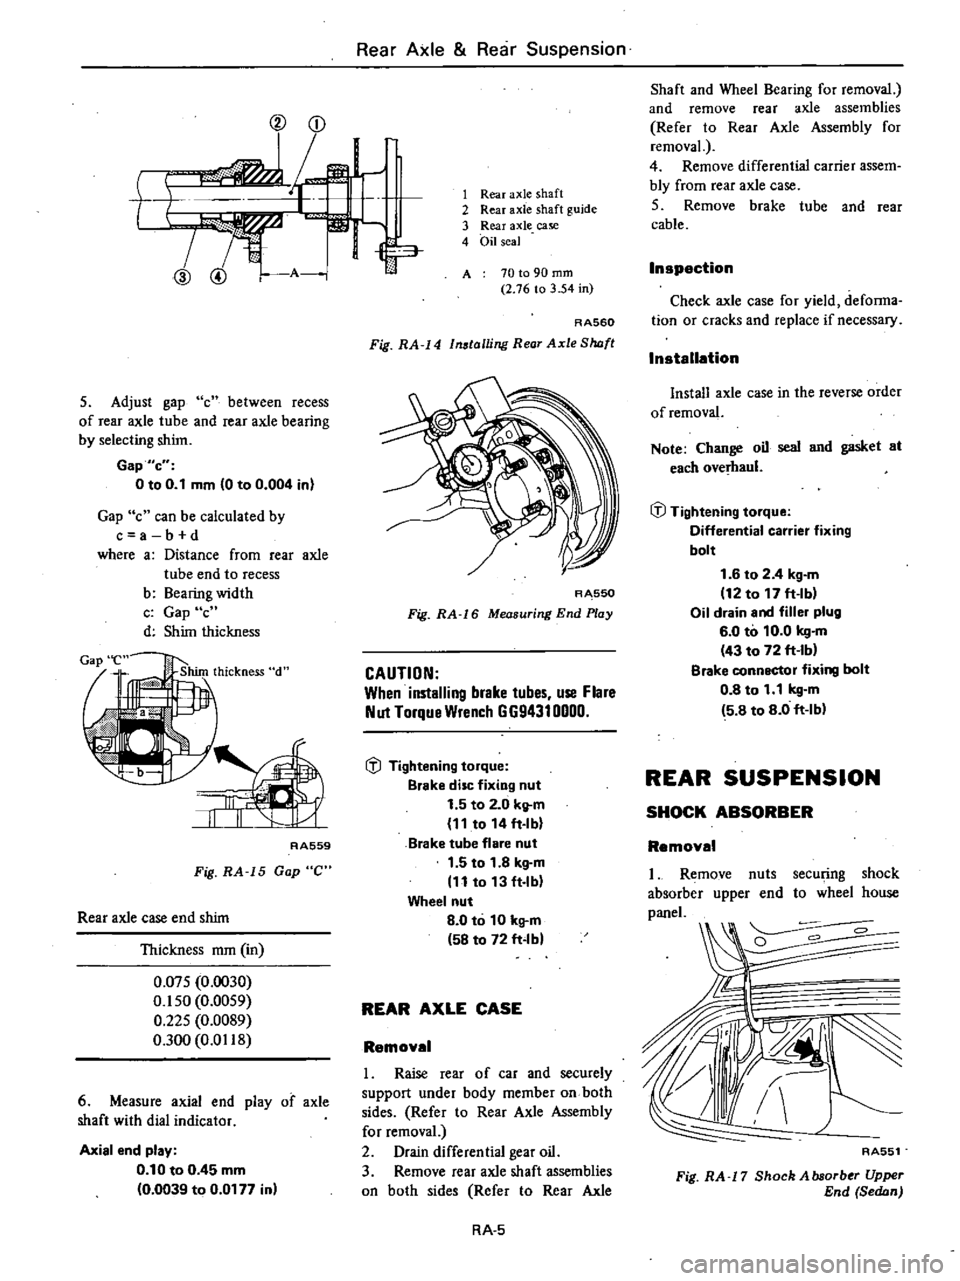 DATSUN 210 1979  Service Manual 
V

CD

l

t

177t

ID 
@ 
A

5

Adjust 
gap 
c

between 
recess

of 
rear 
axle 
tube 
and

rear 
axle

bearing

by 
selecting 
shinto

Gap 
e

o 
to 
0 
1 
mm 
0 
to 
0 
004 
in

Gap 
c 
can 
be

ca